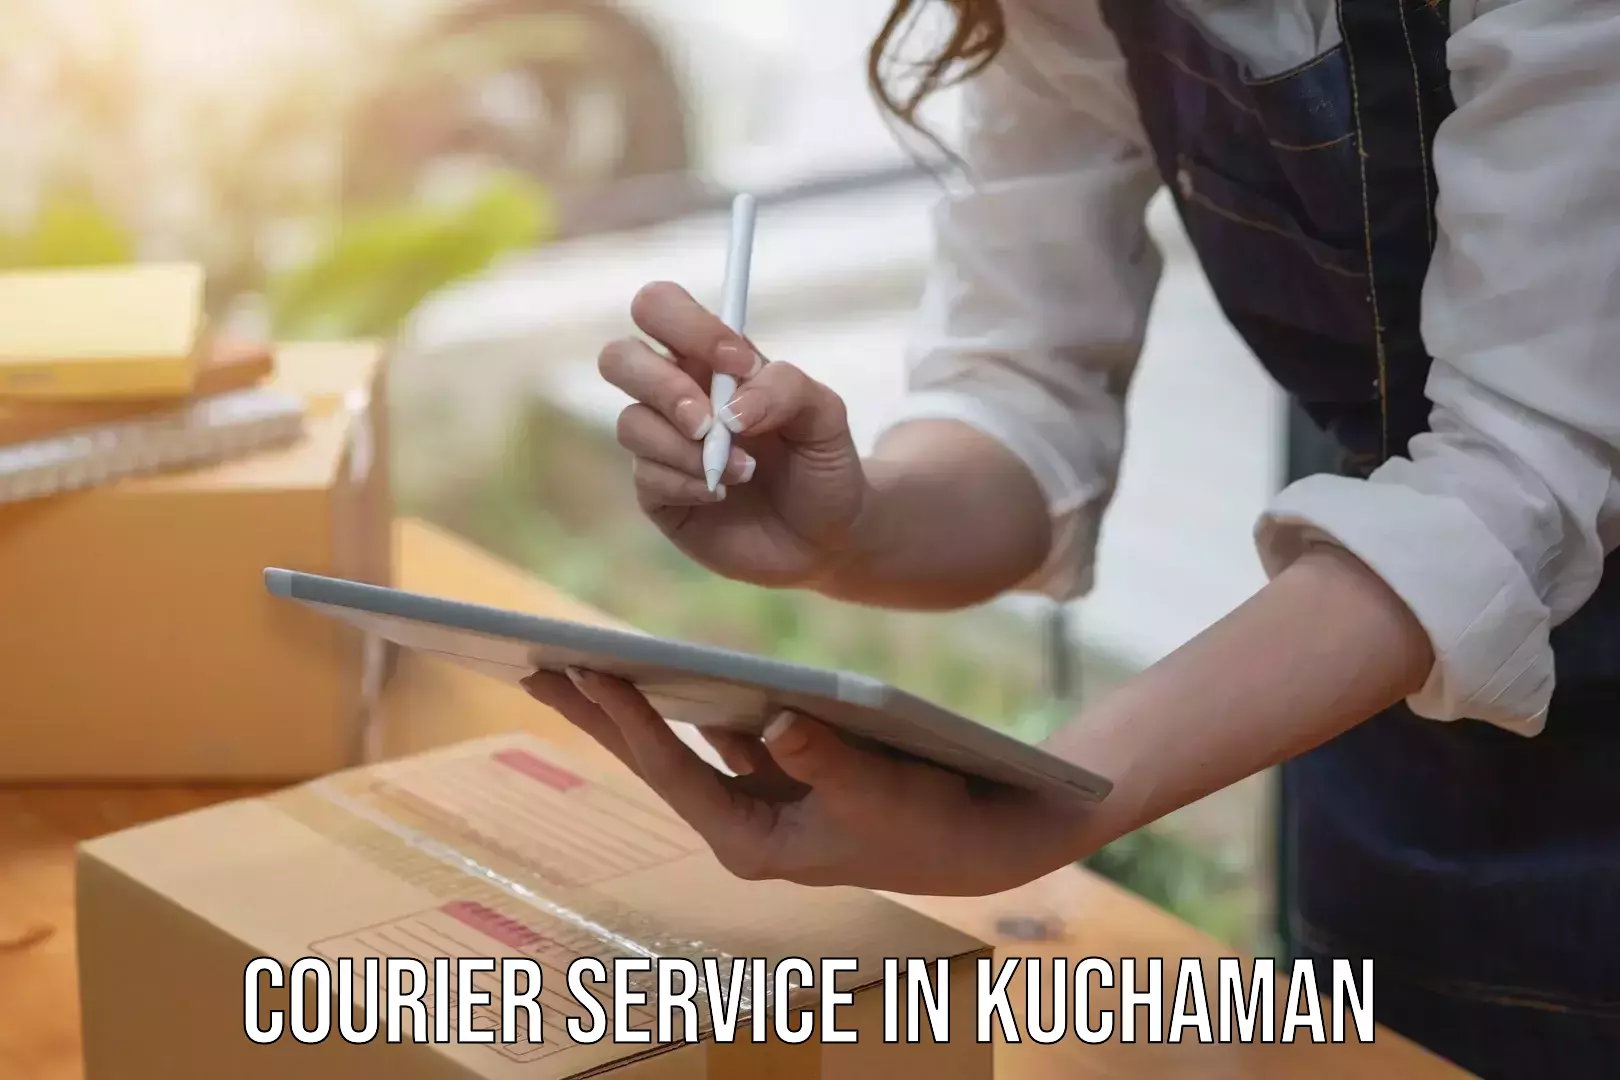 Optimized delivery routes in Kuchaman